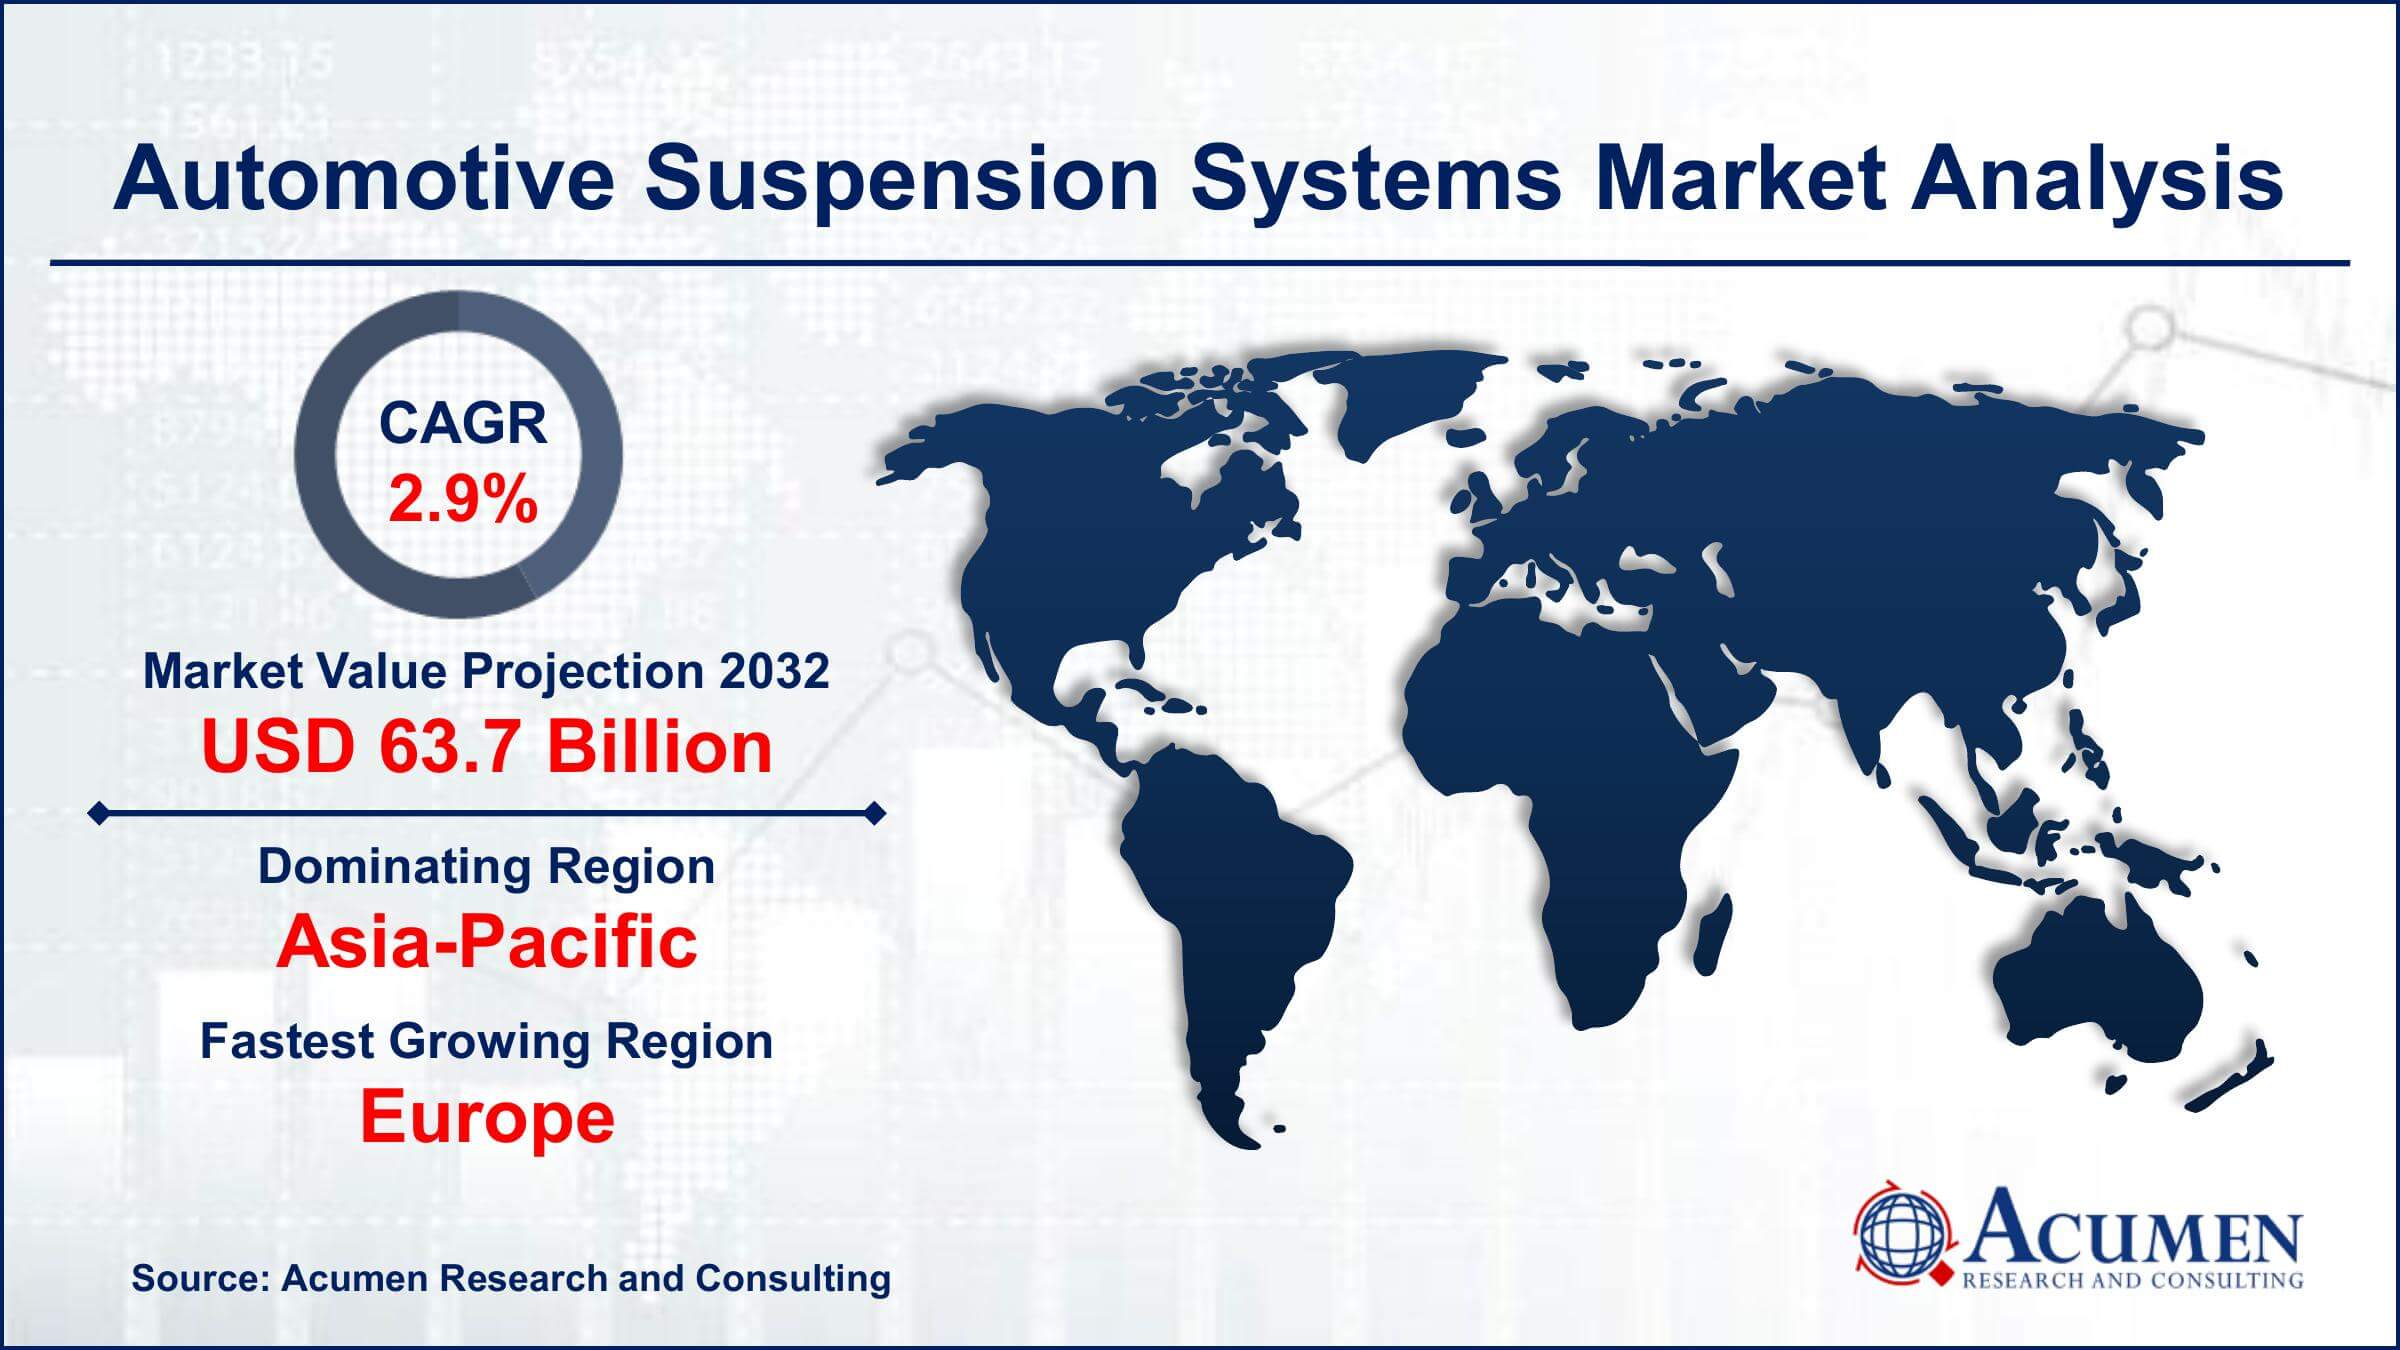 Global Automotive Suspension Systems Market Trends